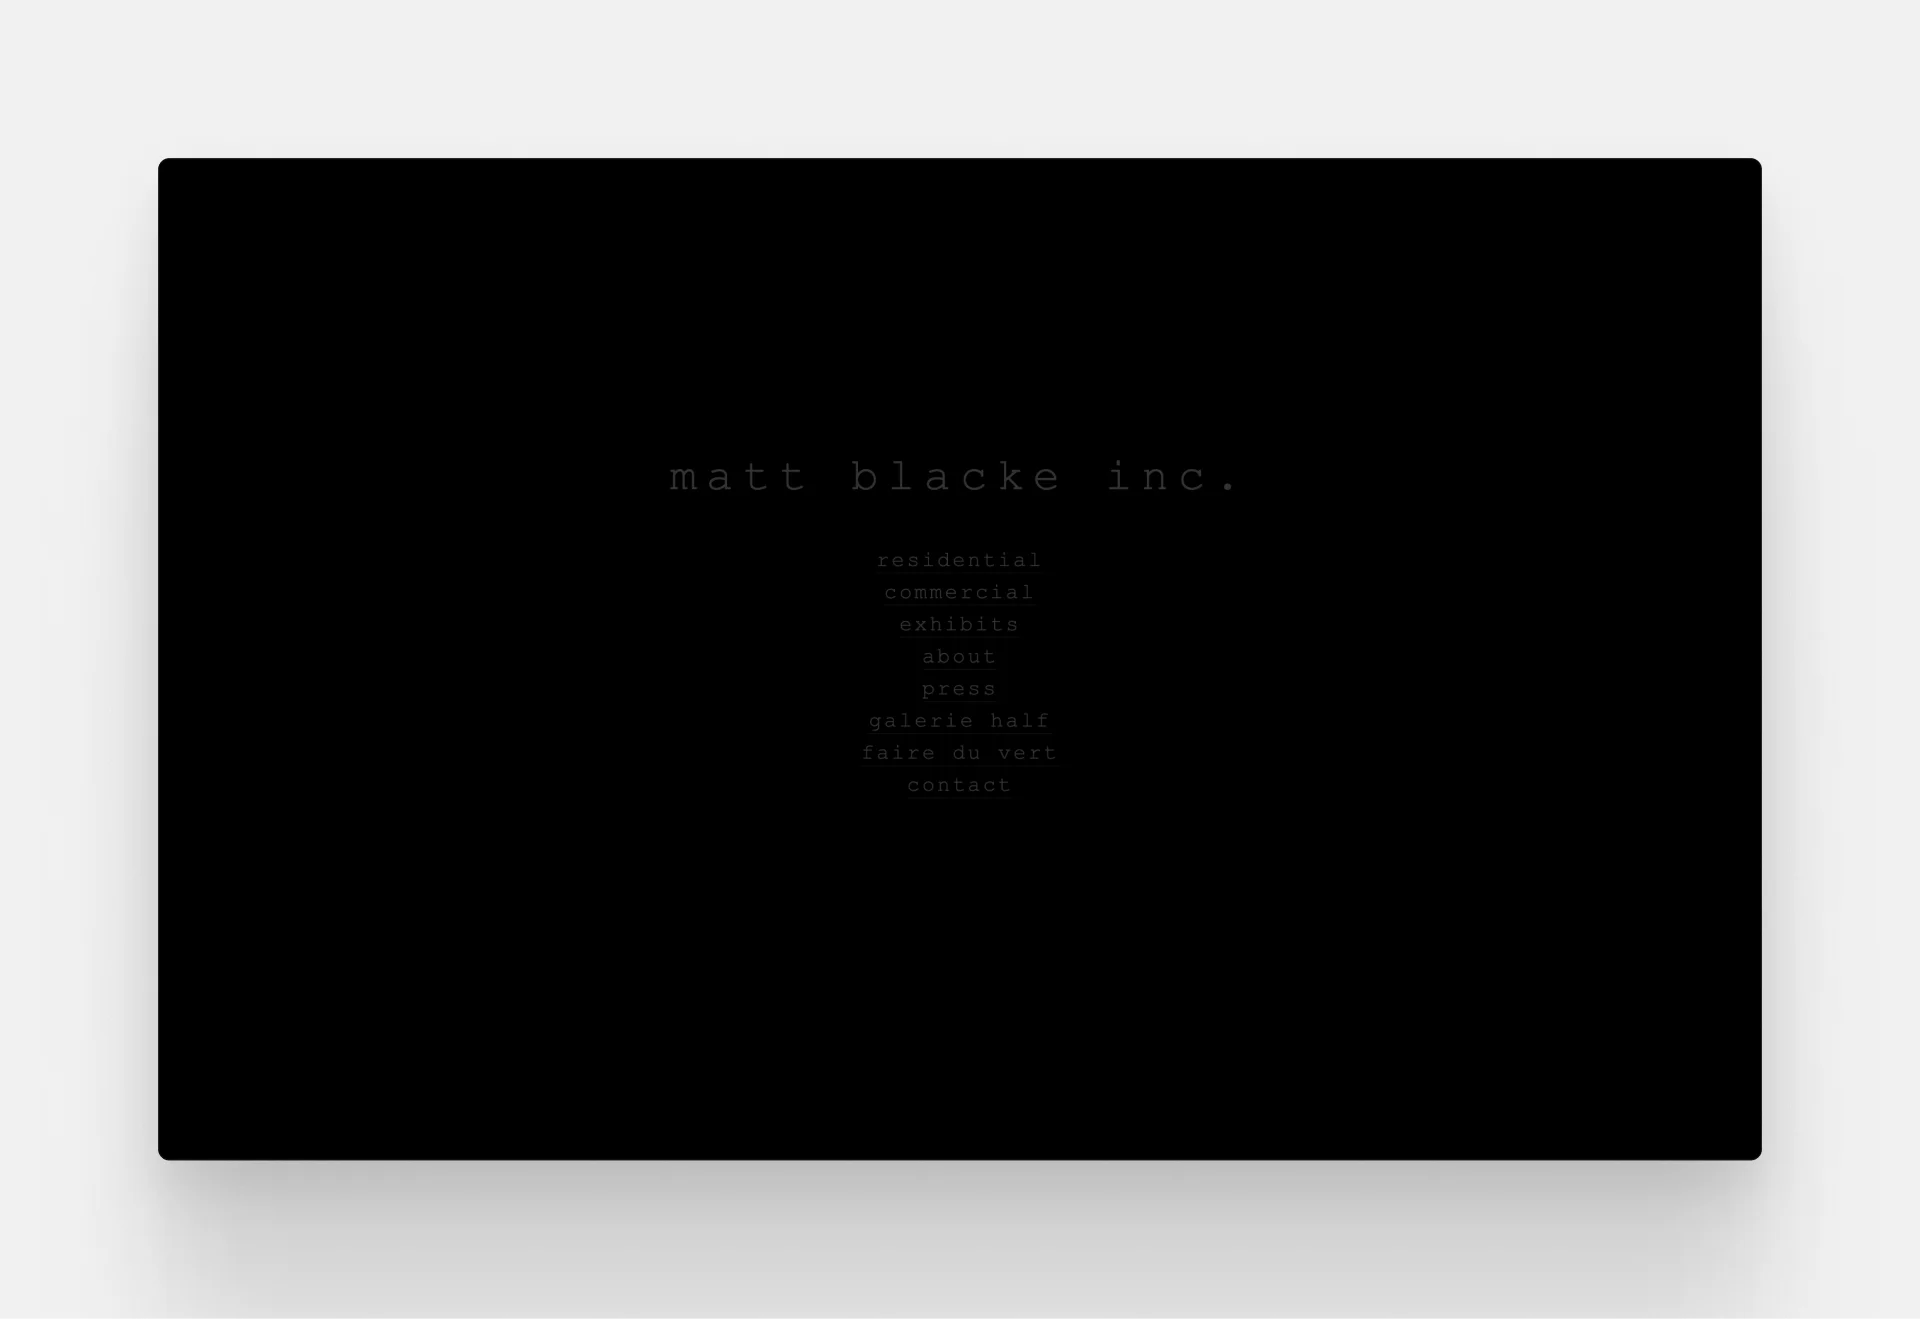 A pitch black interior design portfolio with dark grey text. It's hard to read anything in it due to the lack of contrast.